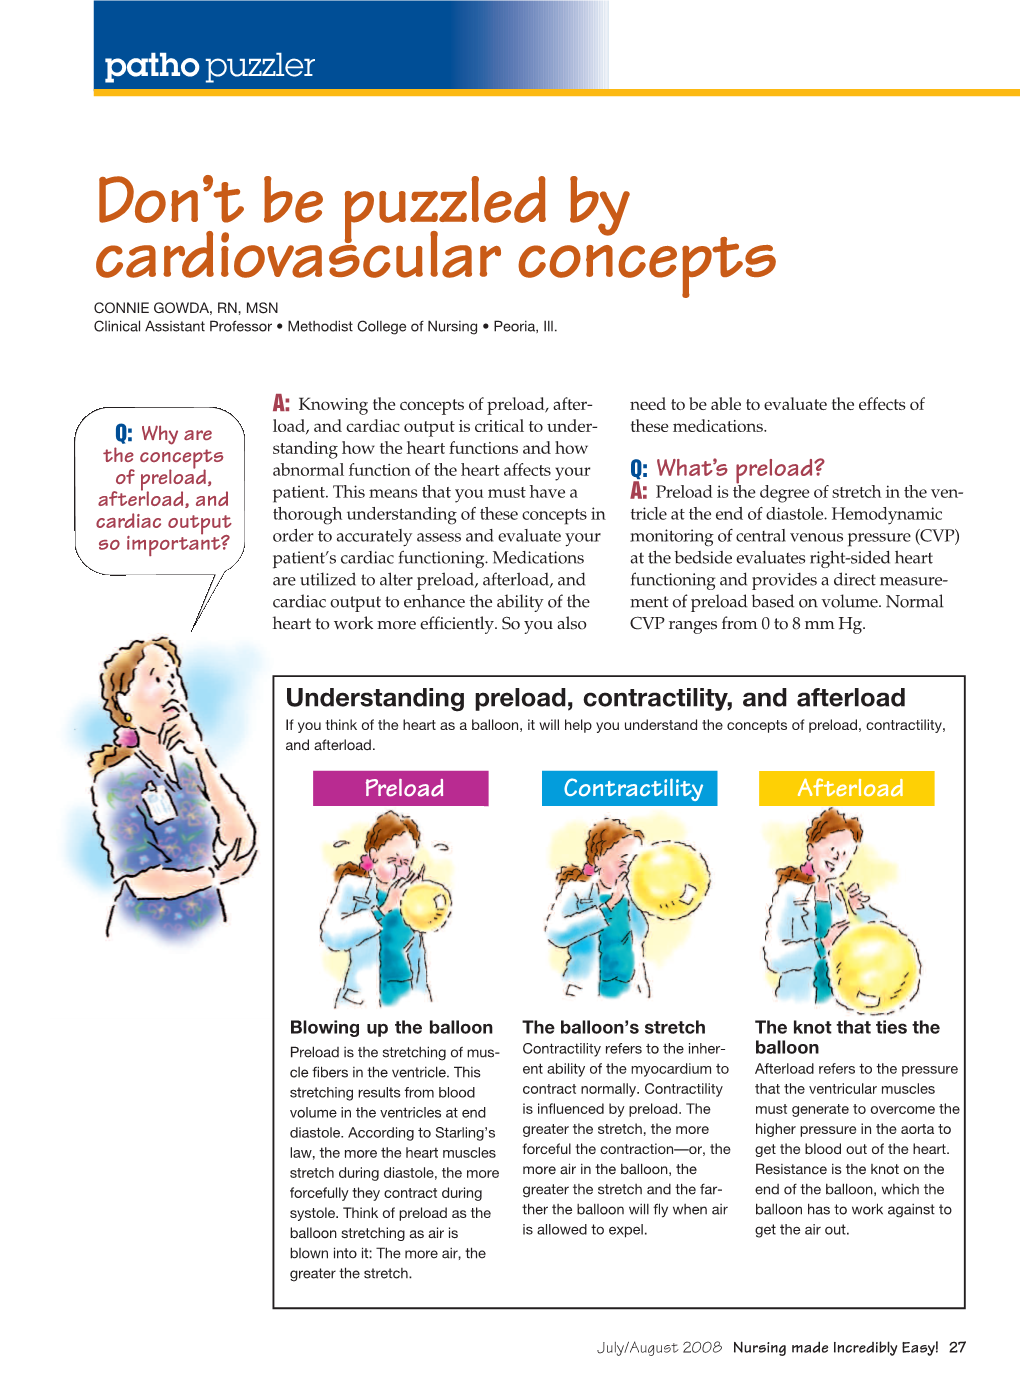 Don't Be Puzzled by Cardiovascular Concepts